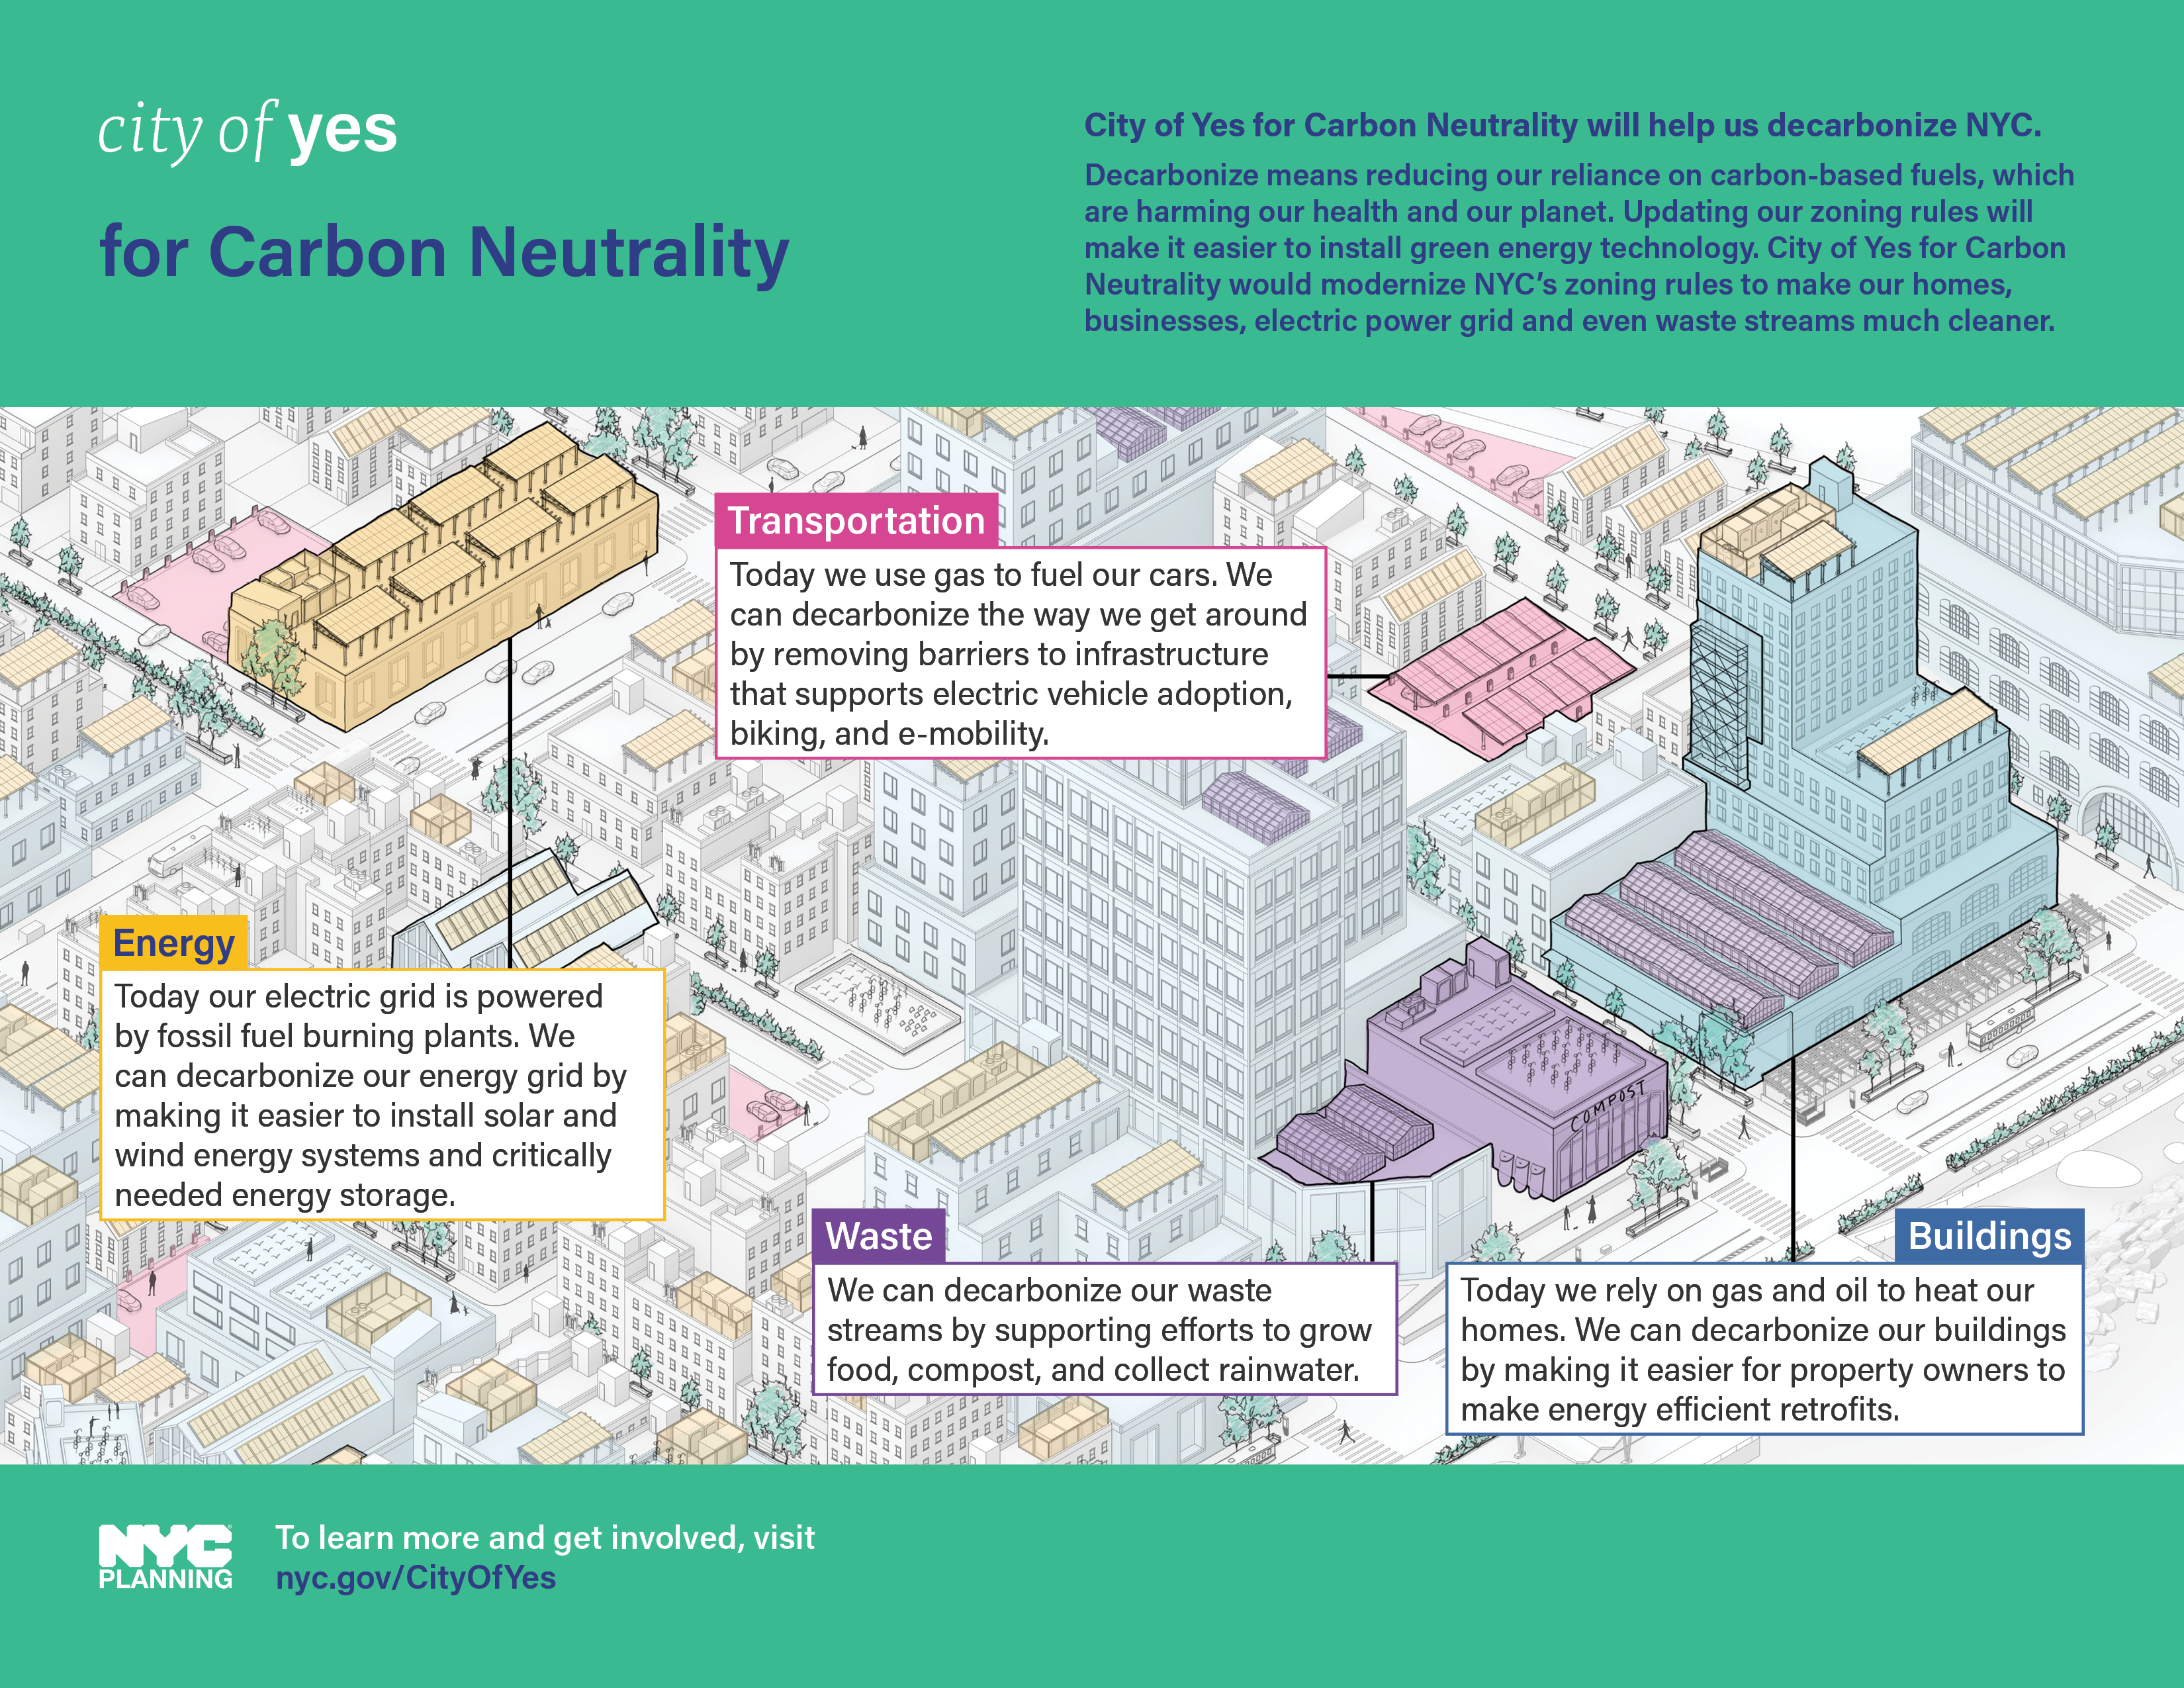 Summary of City of Yes for Carbon Neutrality
